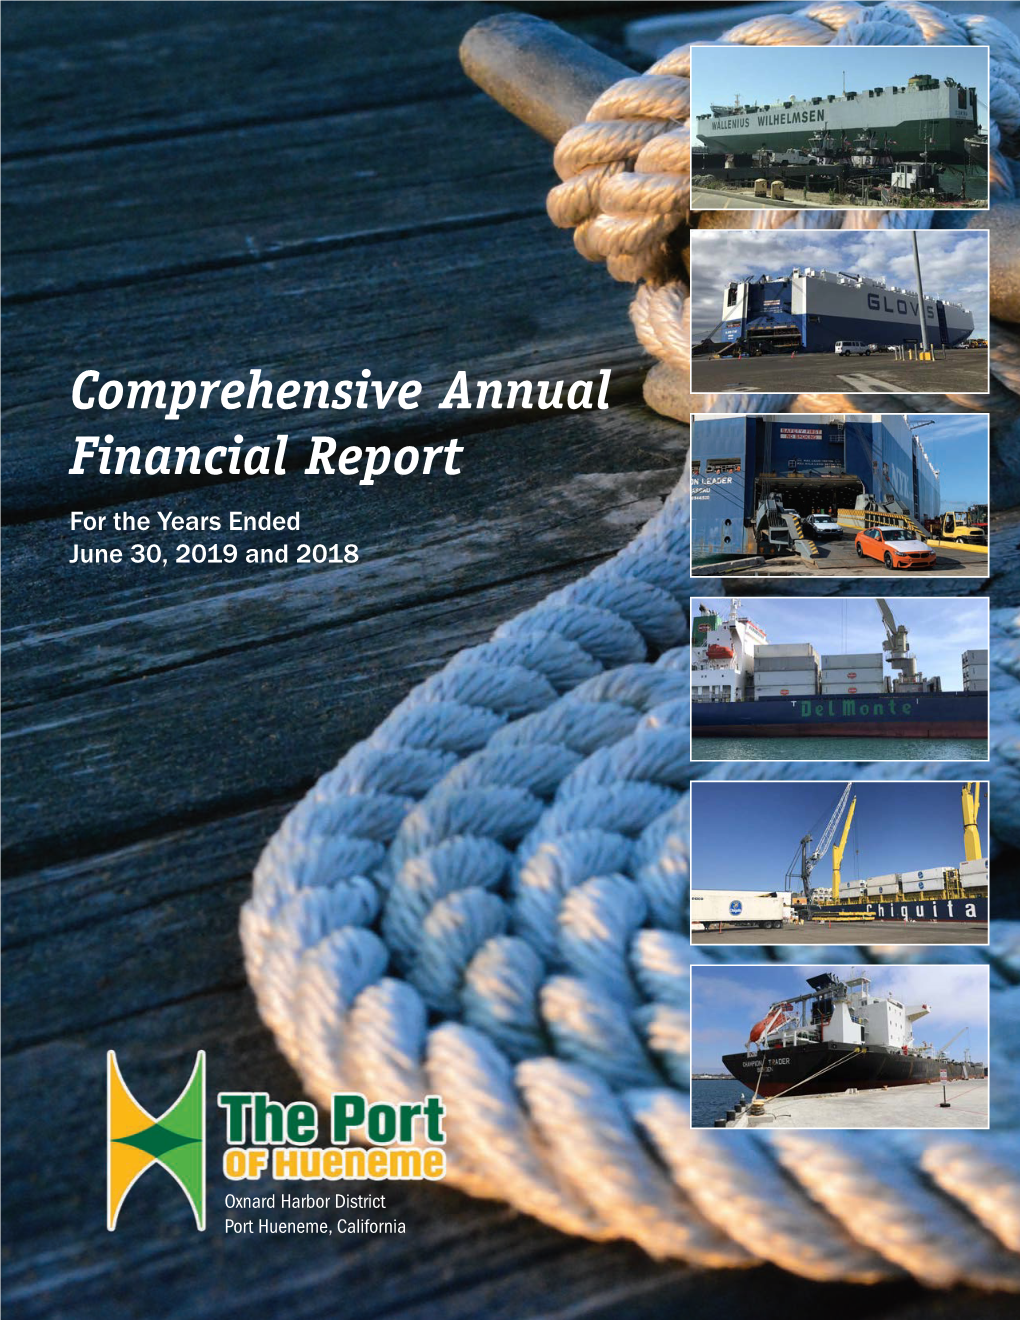 Comprehensive Annual Financial Report for the Years Ended June 30, 2019 and 2018